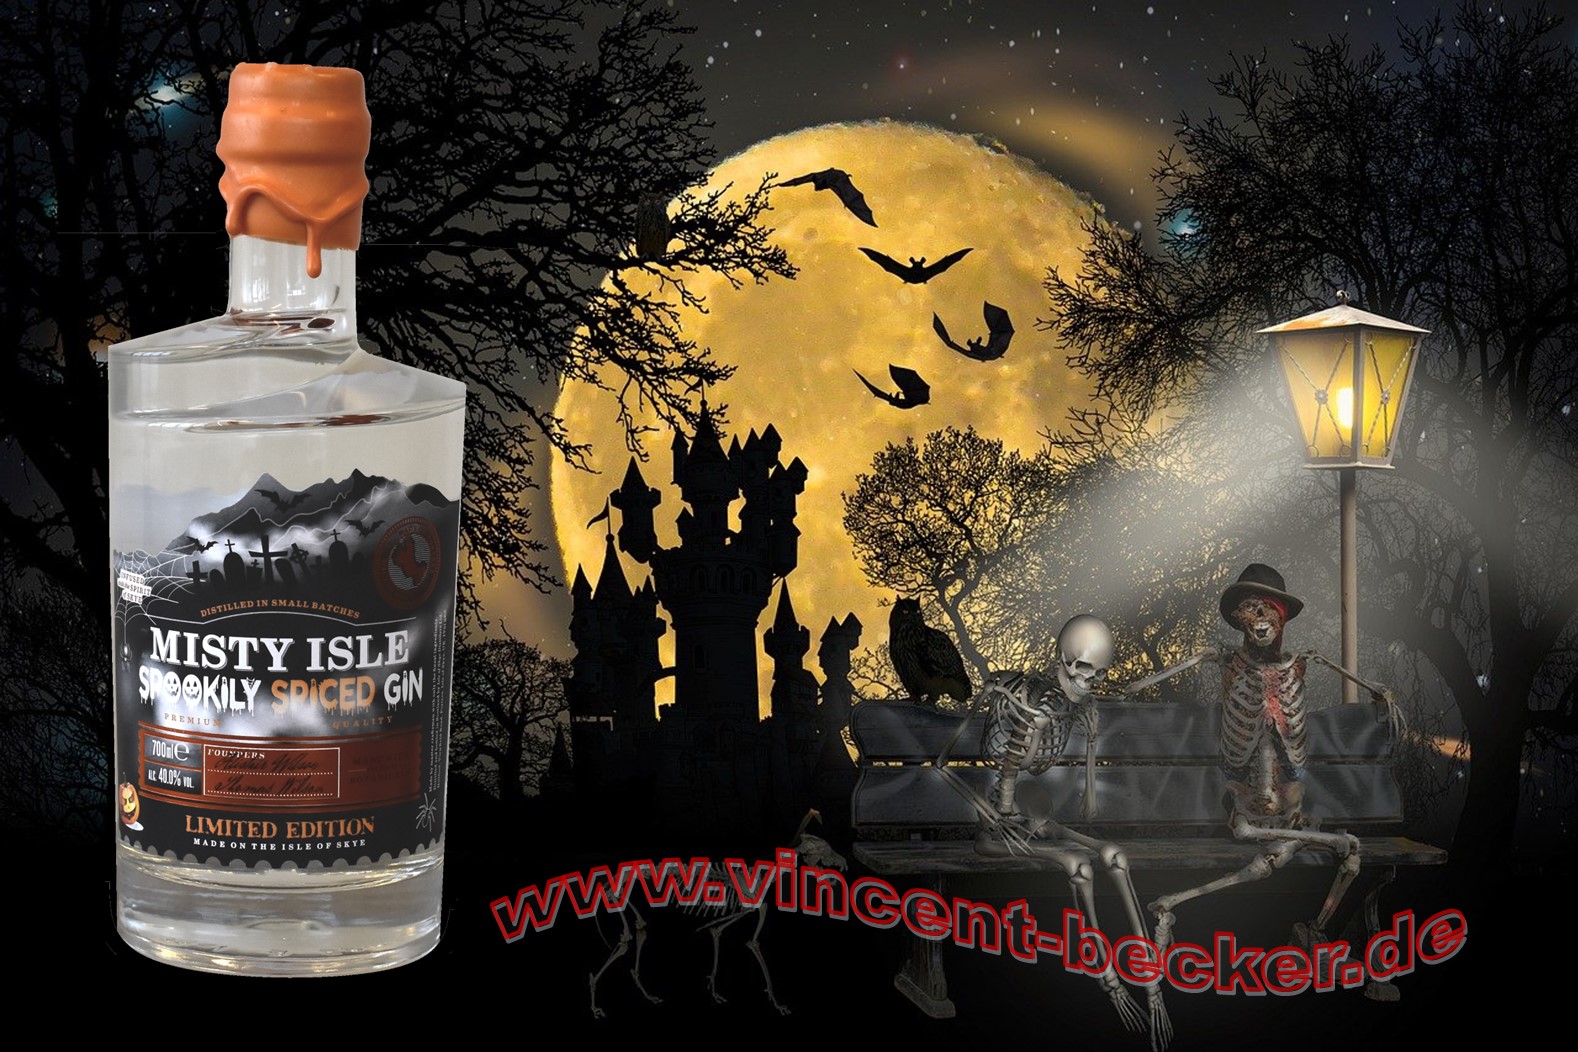 Spookily Spiced Gin 40% Vol. - Isle of Skye - Misty Isle - Limited Edition 0,7 l